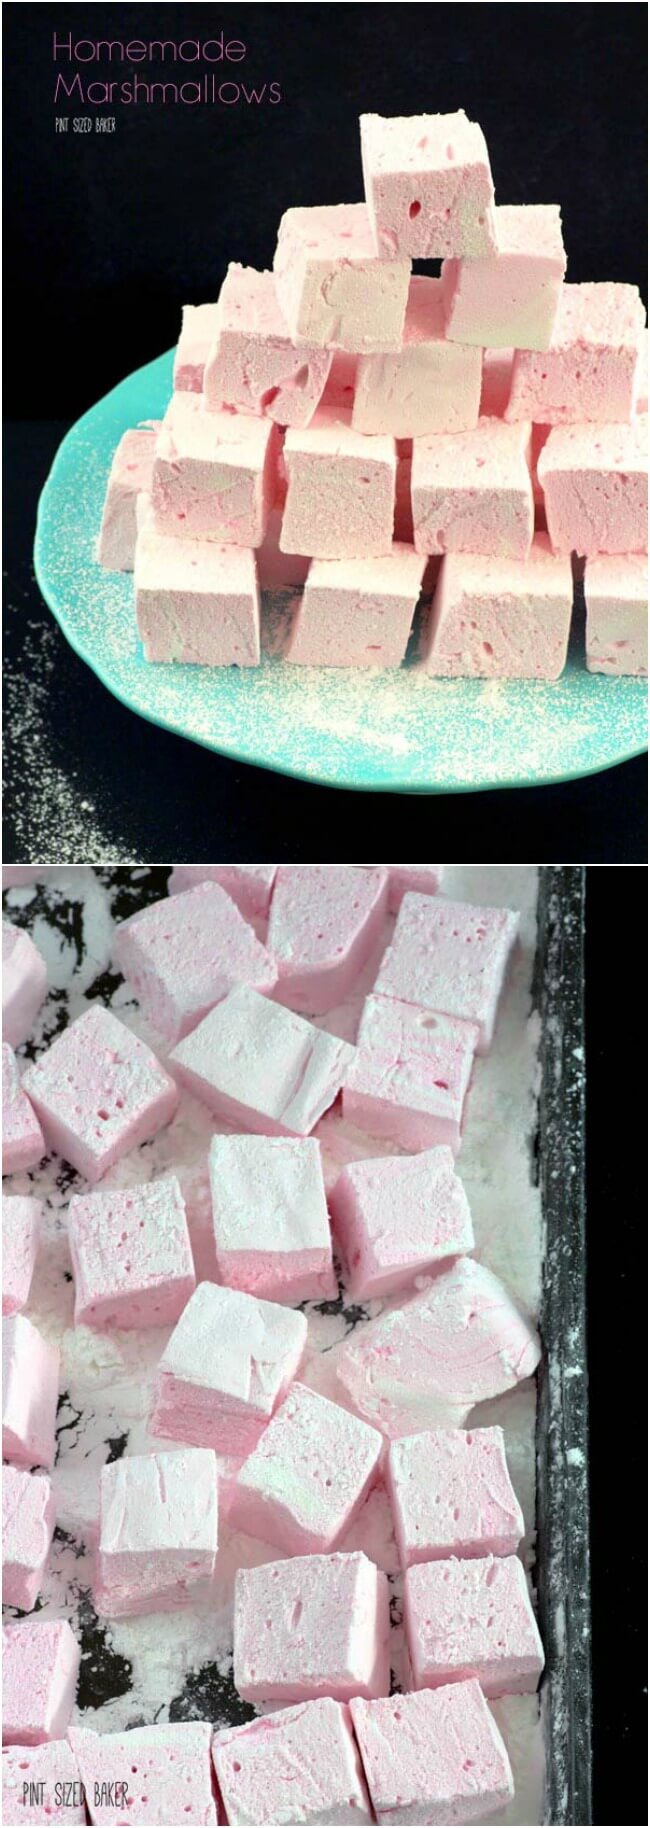 Making homemade marshmallows is actually pretty easy. The key is a stand mixer, a stiff mixture and lots of patience while the marshmallows cure.